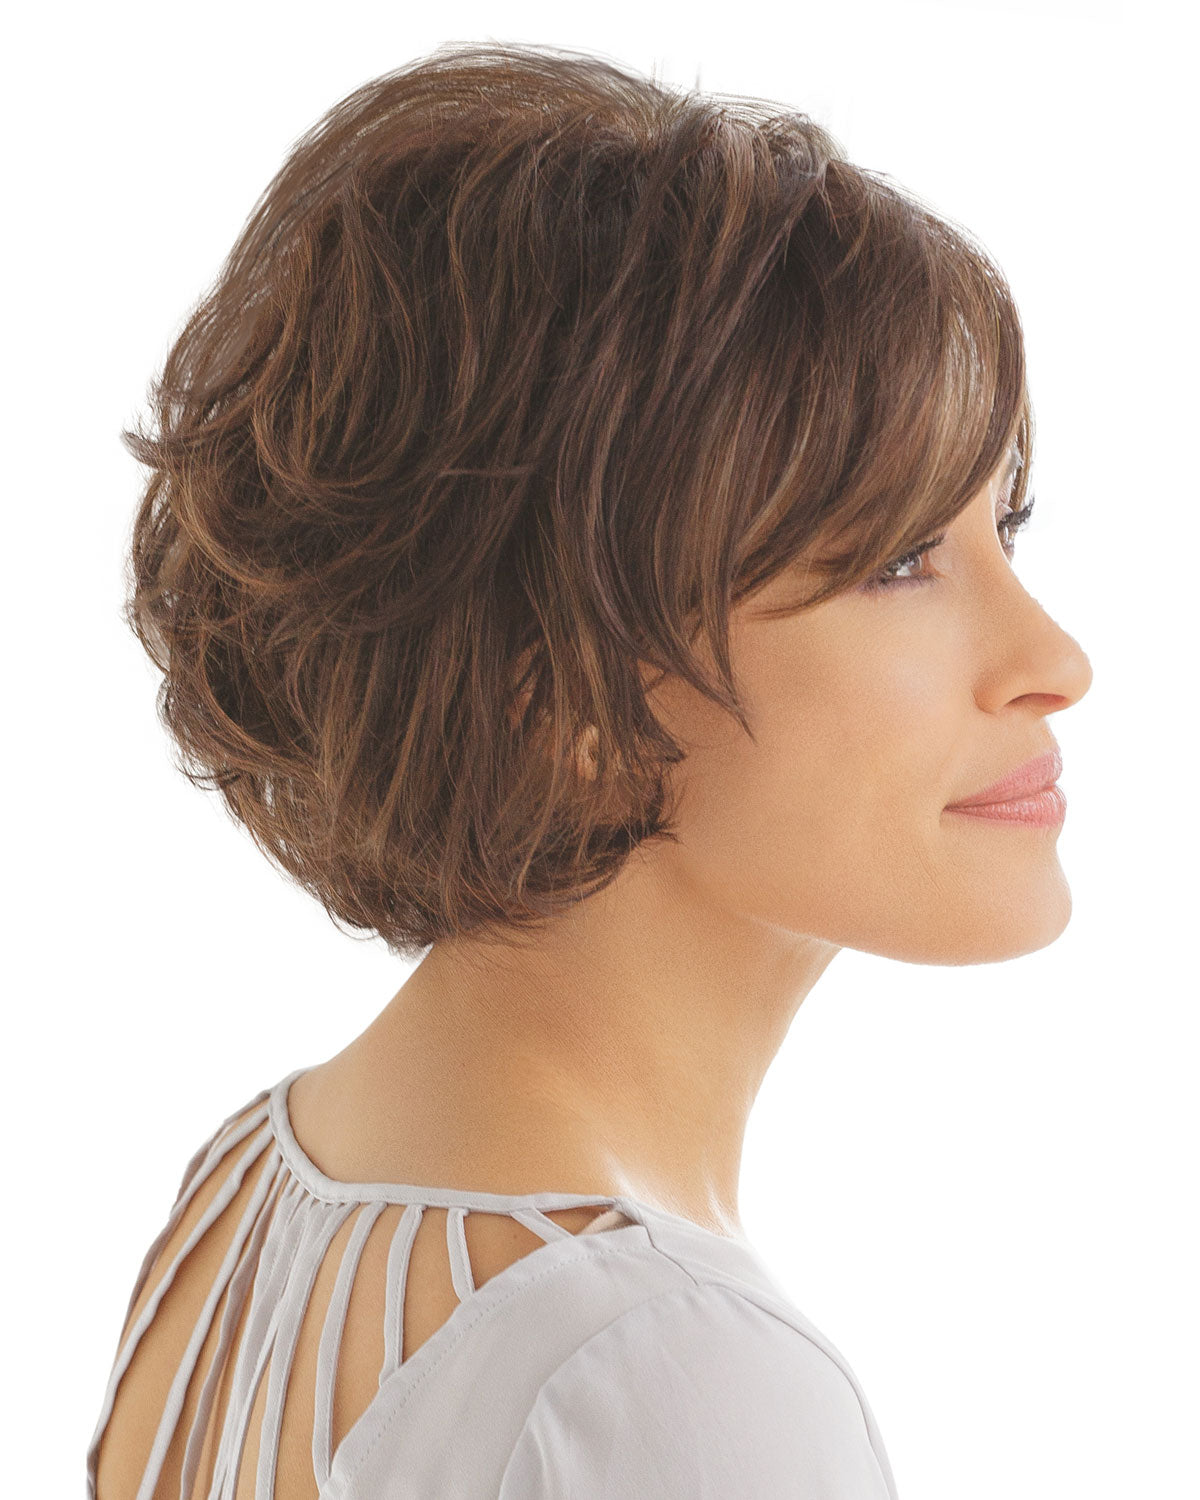 Tunsori Femei 2018 - Short Bob Hairstyle for Fine Hair 2019 You Must Try -  LatestHairstylePedia.com https://www.latesthairstylepedia.com/2019/03/short- bob-hairstyle-for-fine-hair.html | Facebook